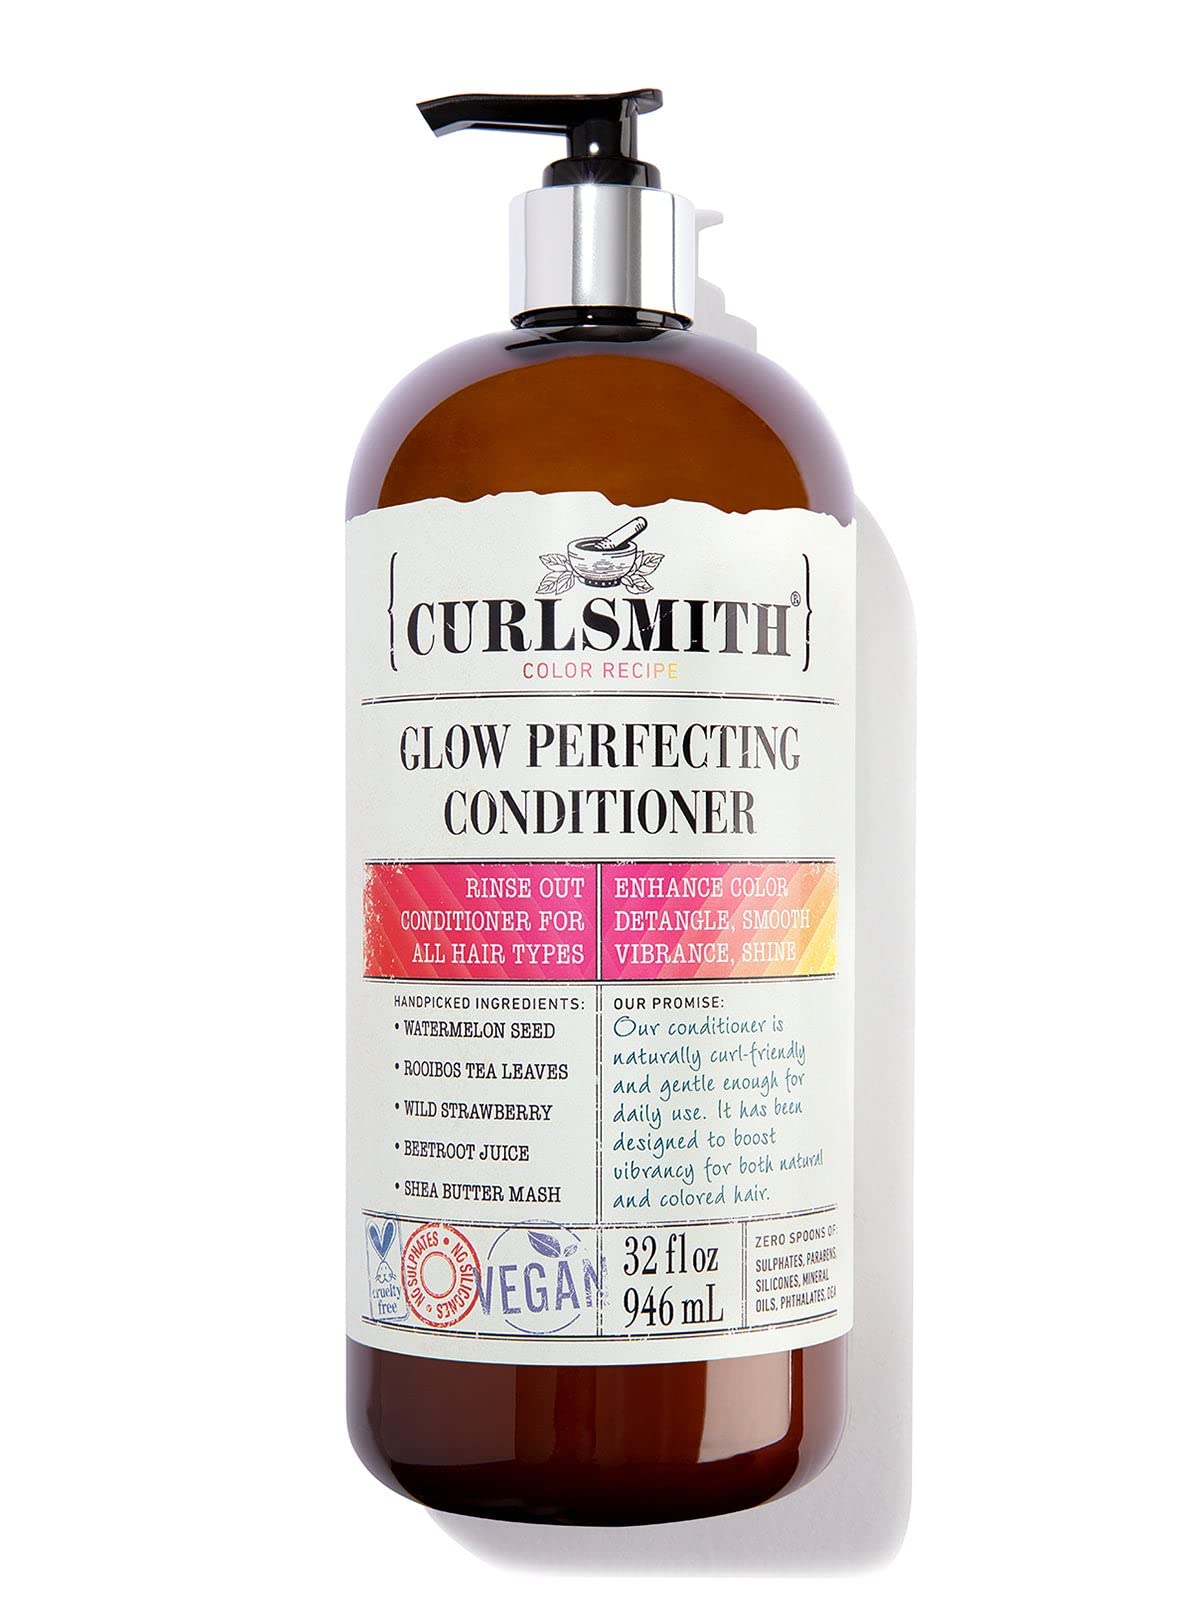 CURLSMITH - Glow Perfecting Conditioner - Vegan Conditioner for Any Hair Type (32 fl oz)